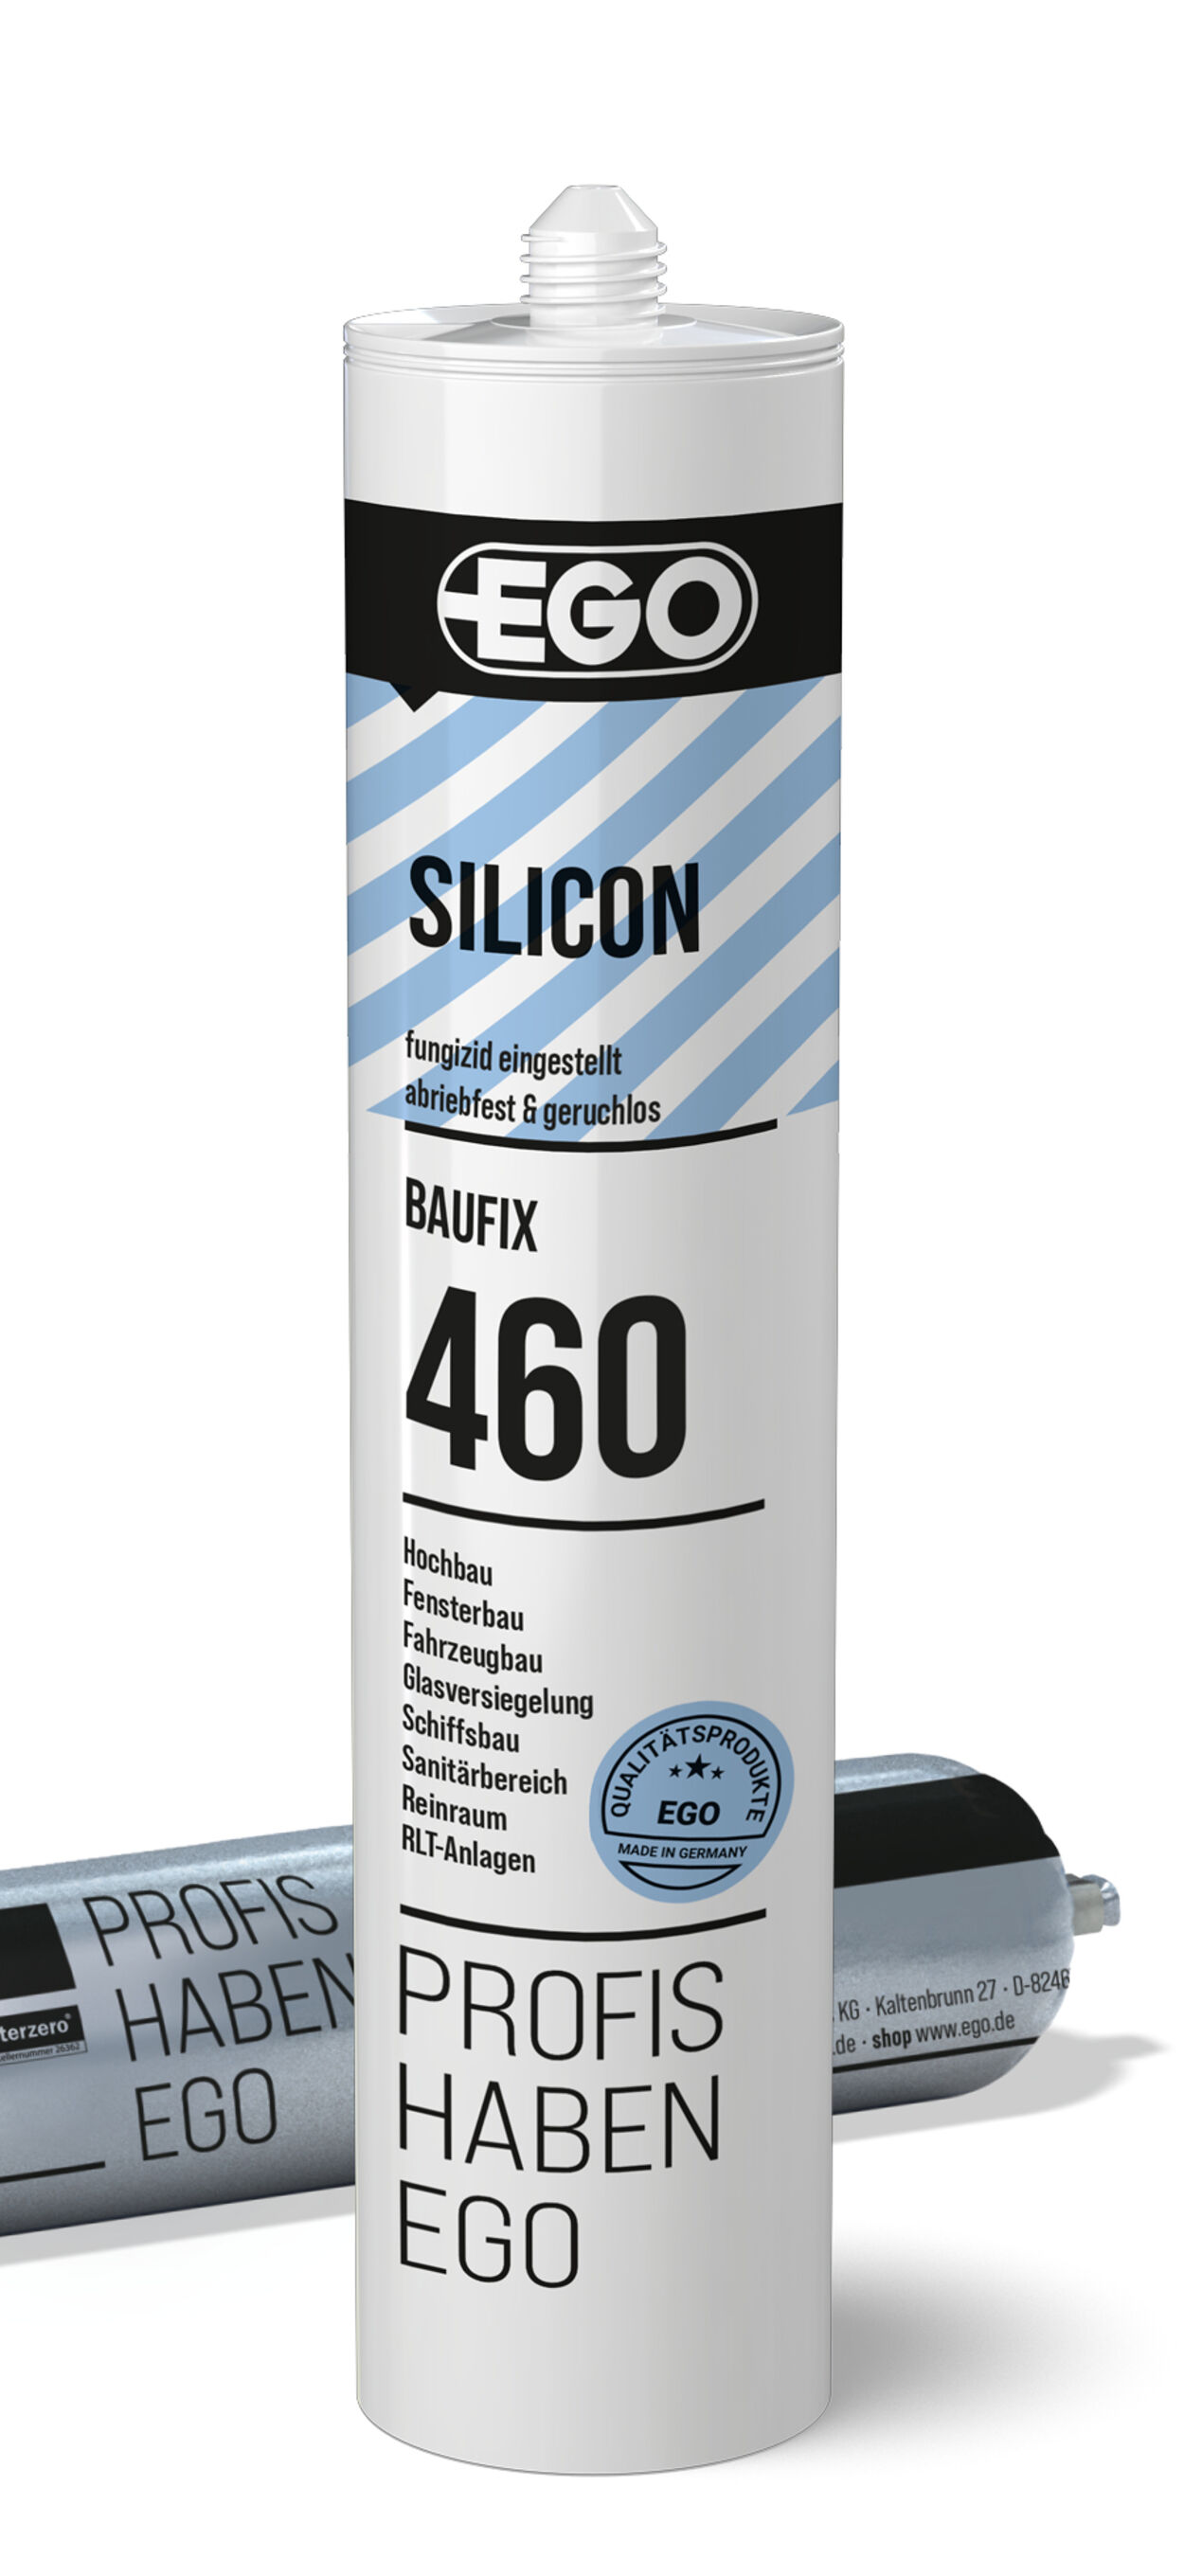 Silicone sealant for building waterproofing